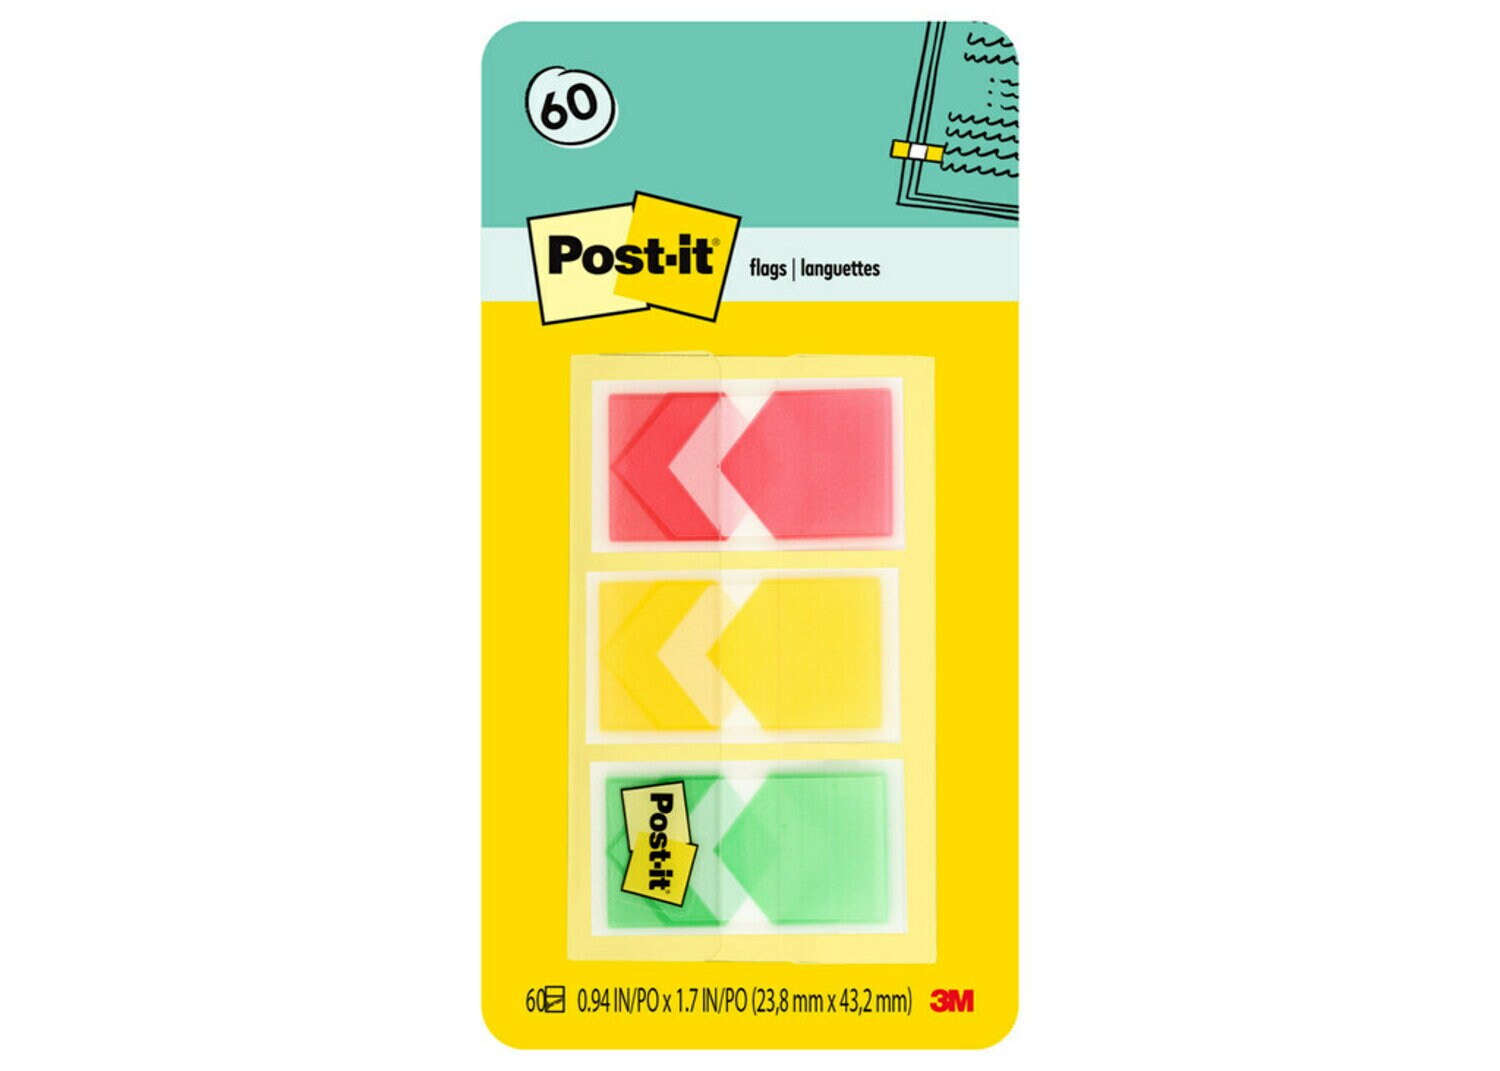 7100062011 - Post-it Prioritization Flags 682-ARR-RYG, .94 in. x 1.7 in. (24 mm x
43.2 mm)